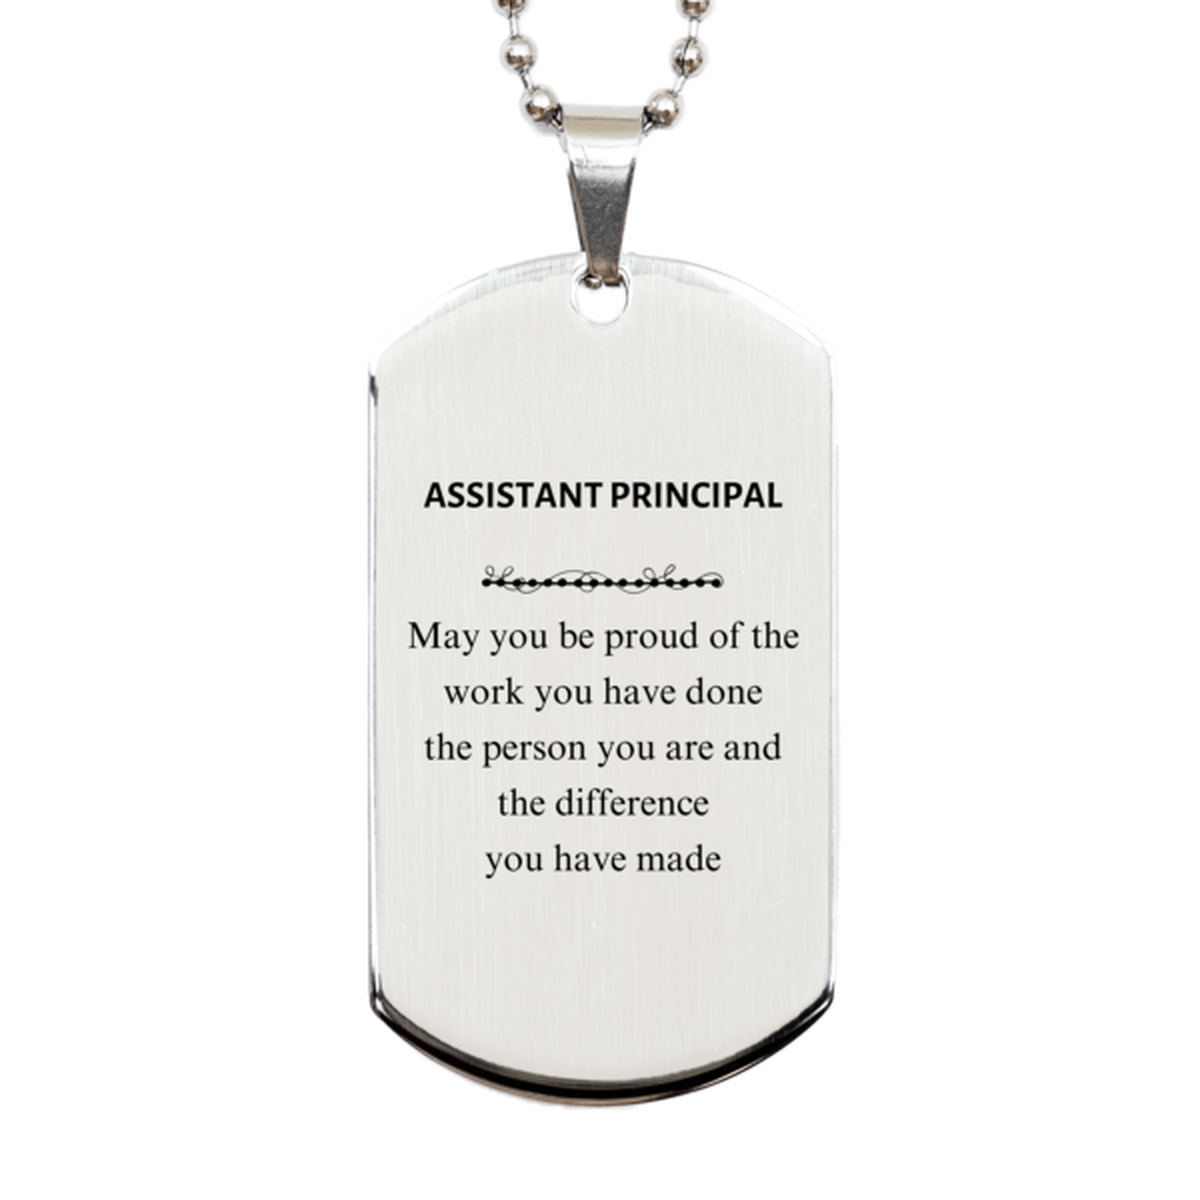 Assistant Principal May you be proud of the work you have done, Retirement Assistant Principal Silver Dog Tag for Colleague Appreciation Gifts Amazing for Assistant Principal